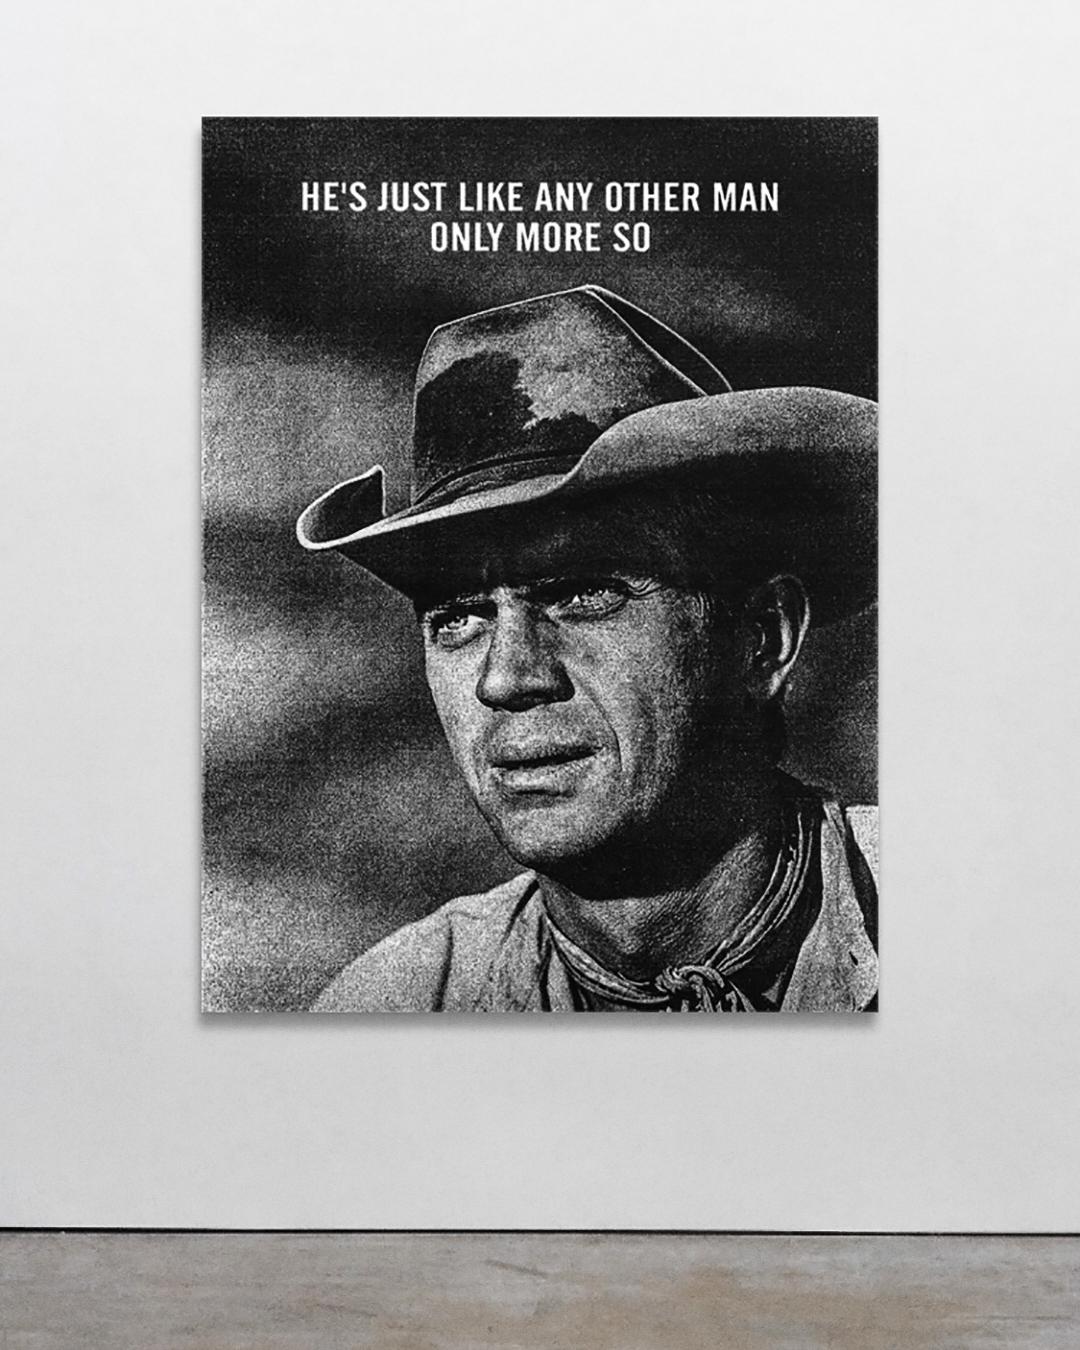 Only More So - Cowboy, Text, Black and White - Pop Art Mixed Media Art by Ryan Mulford